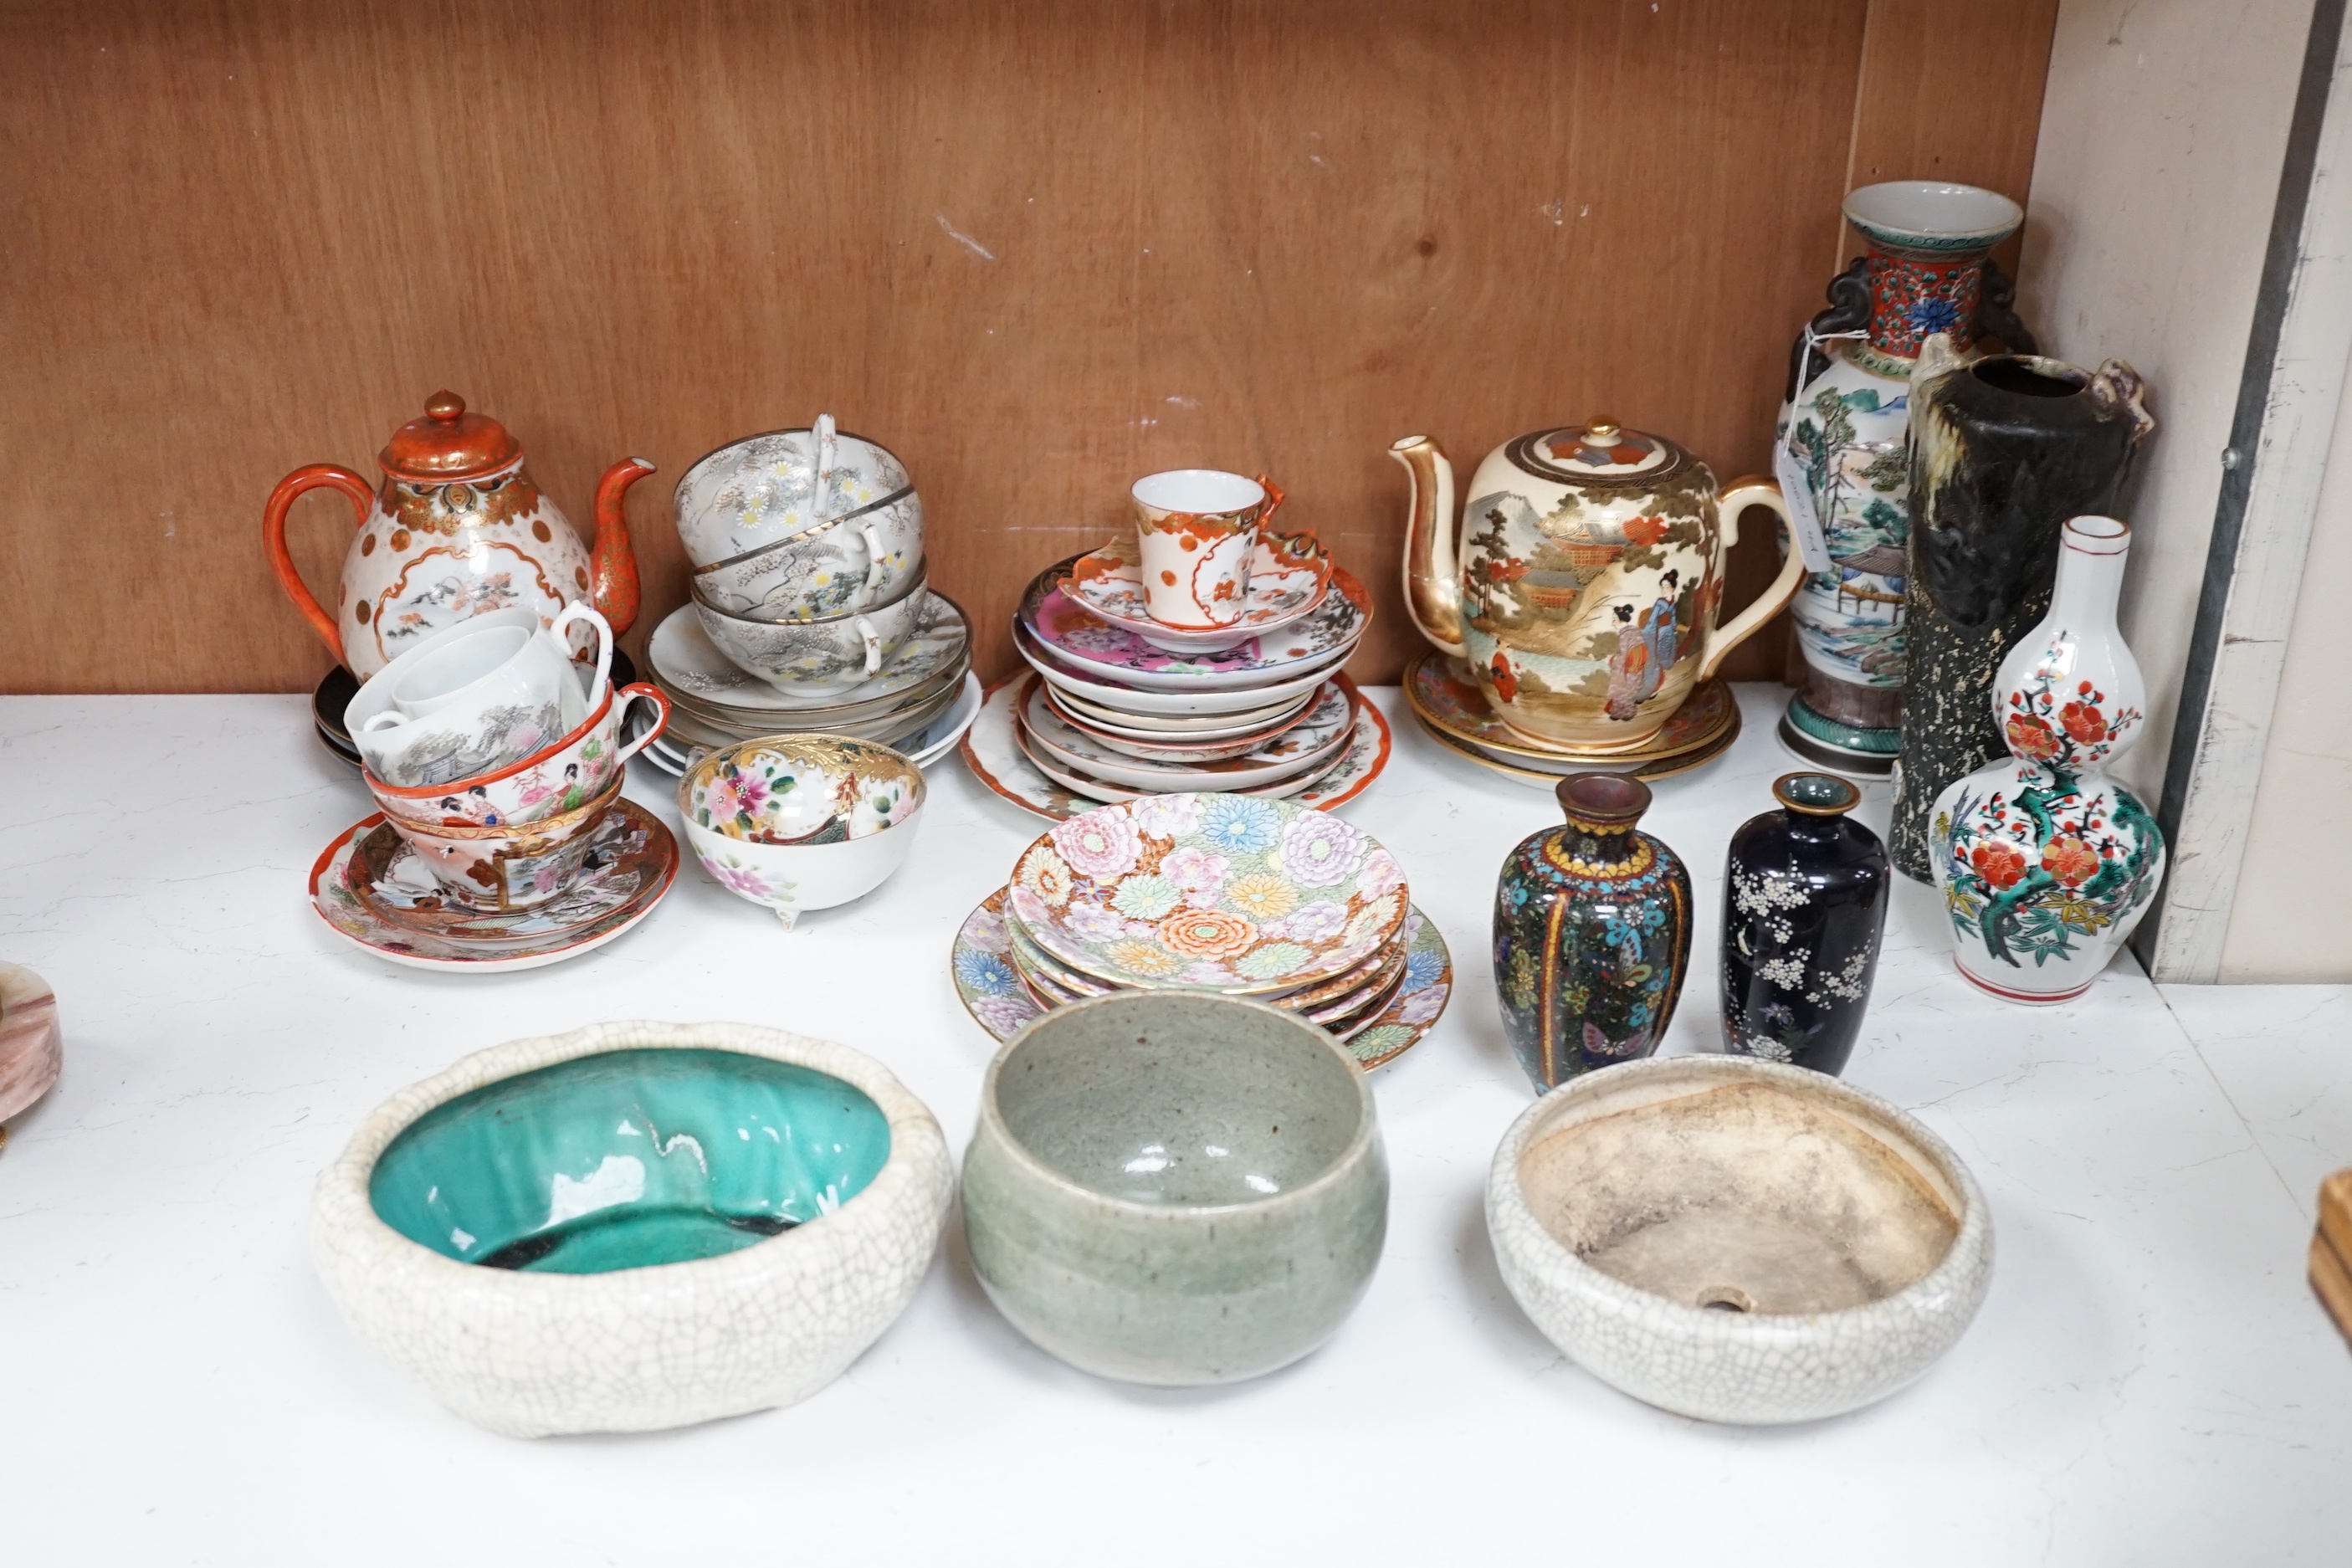 A group of various Japanese ceramics to include kutani and egg shell teawares, a Chinese crackle glaze jardiniere and another, a Chinese crackleware bowl and a blanc de chine cup